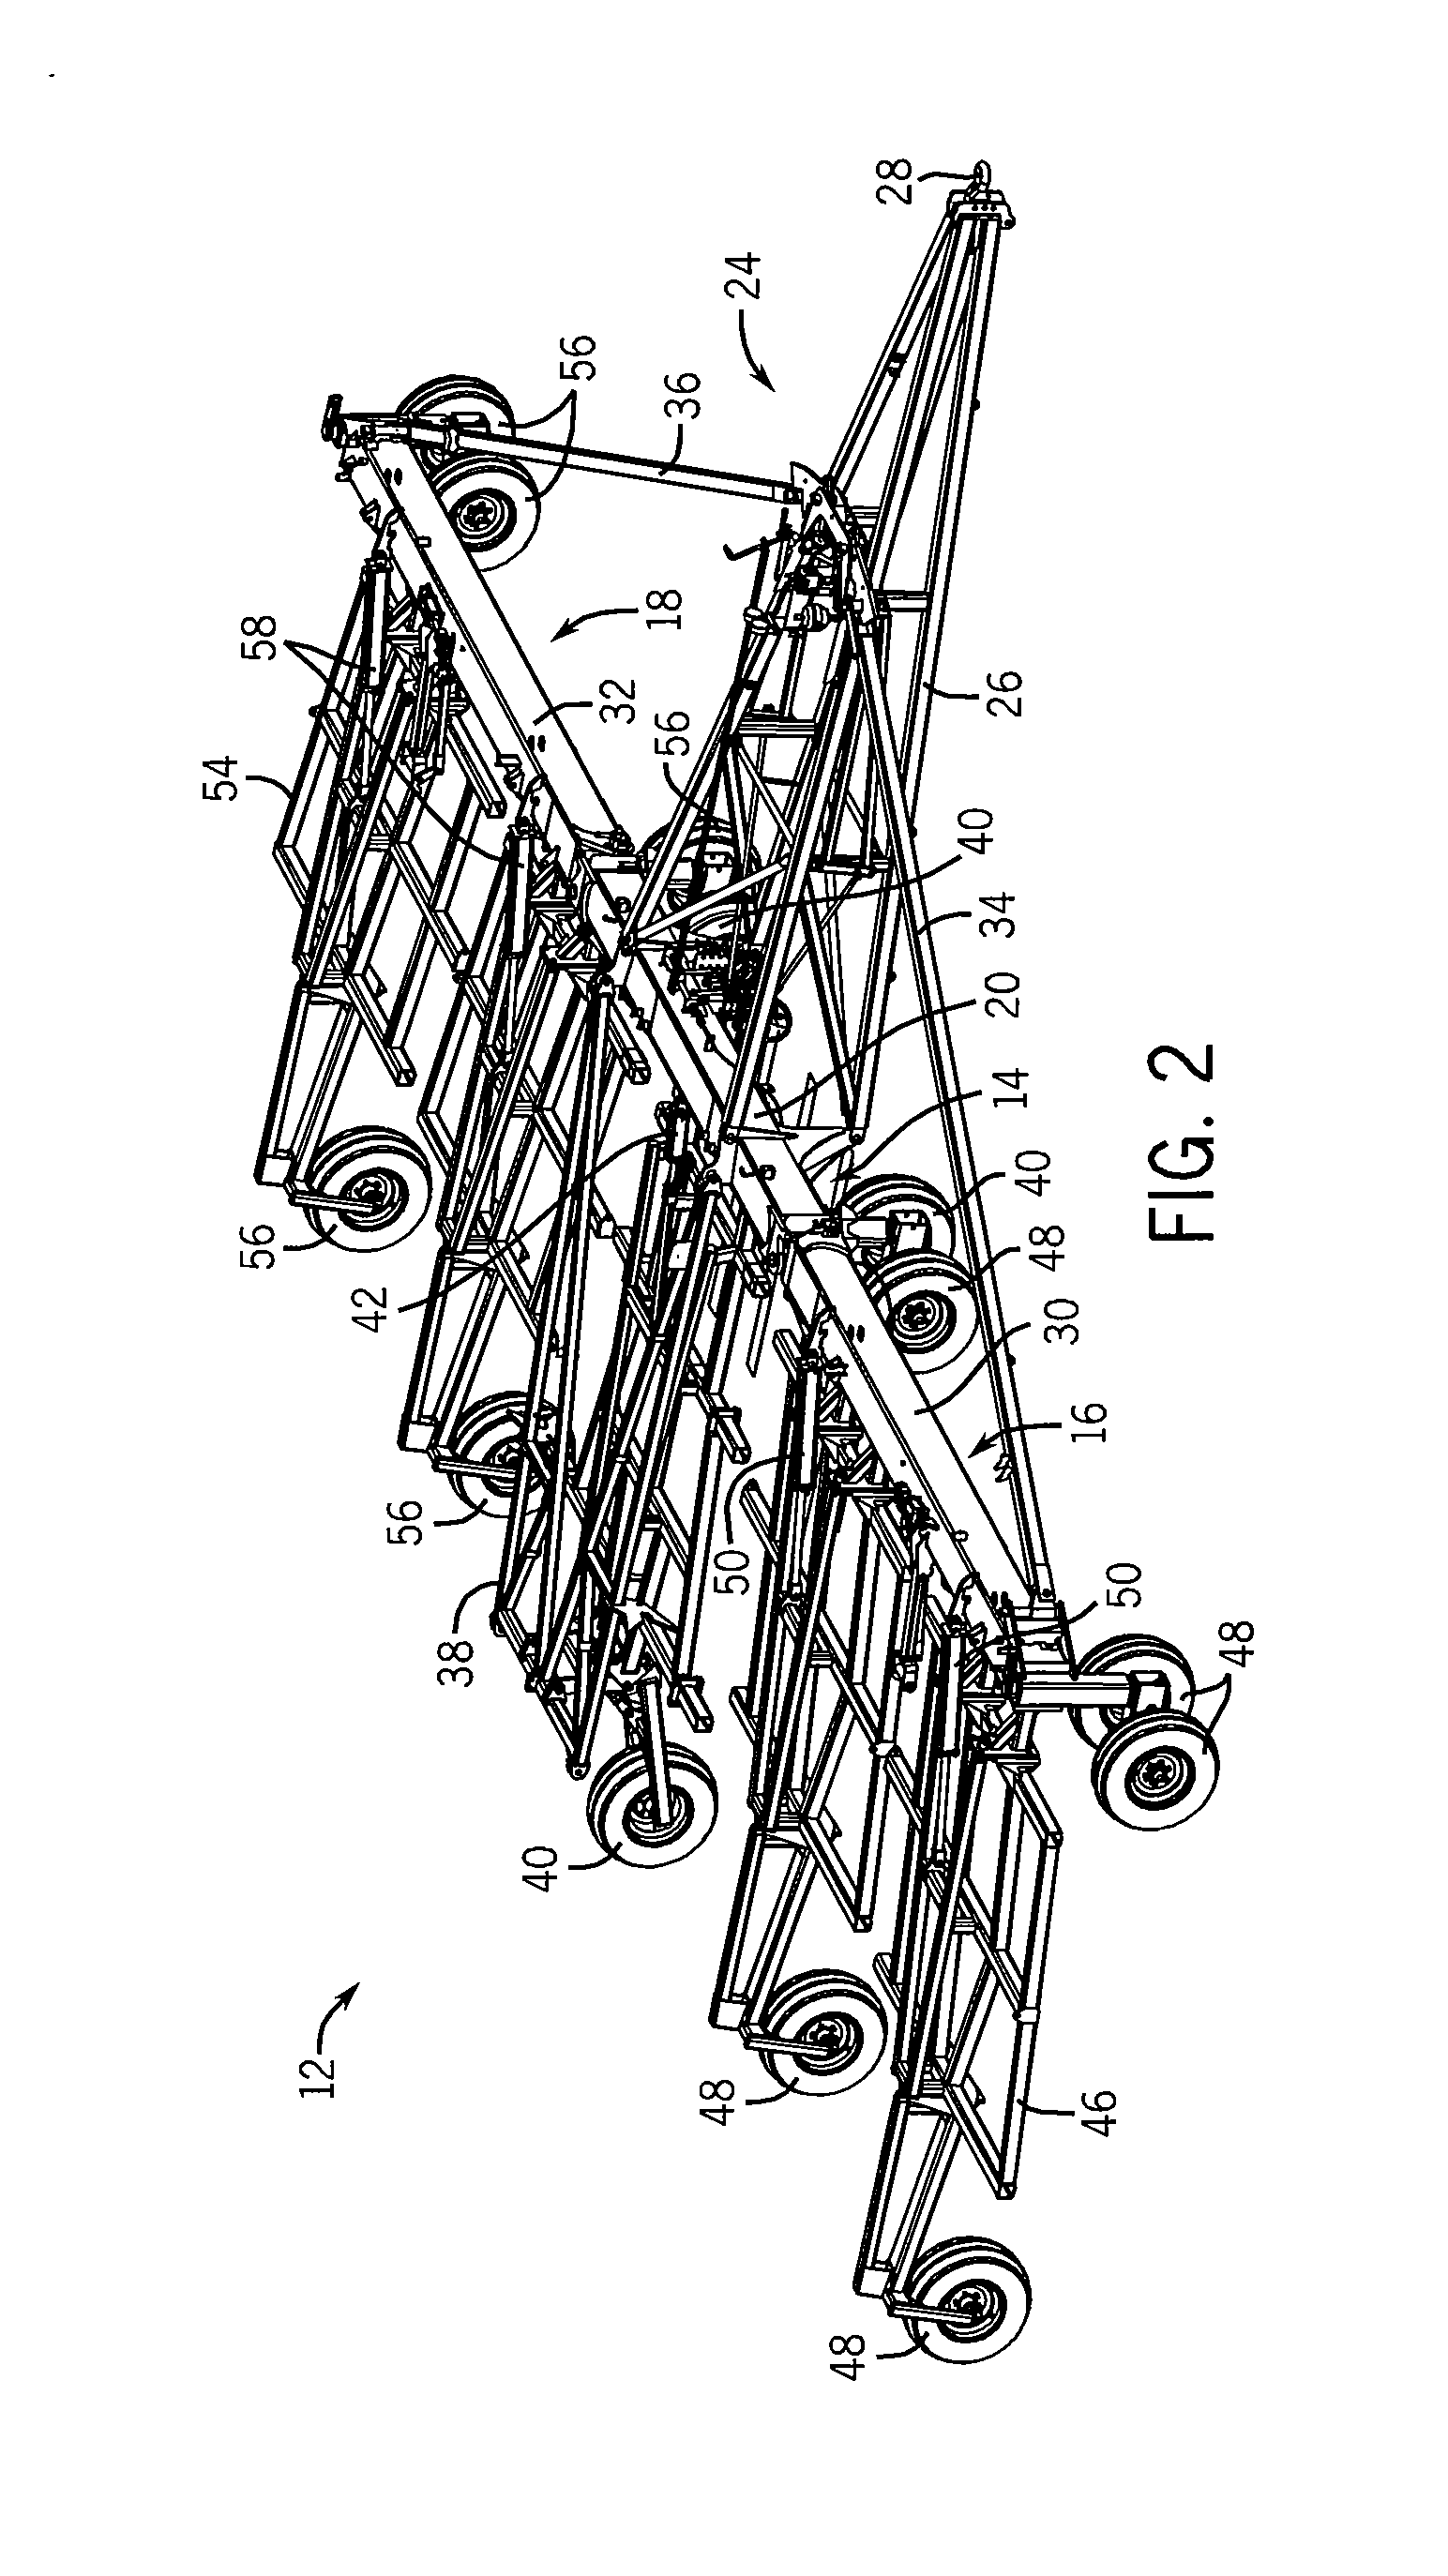 Hydraulic Remote Control For Hydraulic System Of An Agricultural Implement